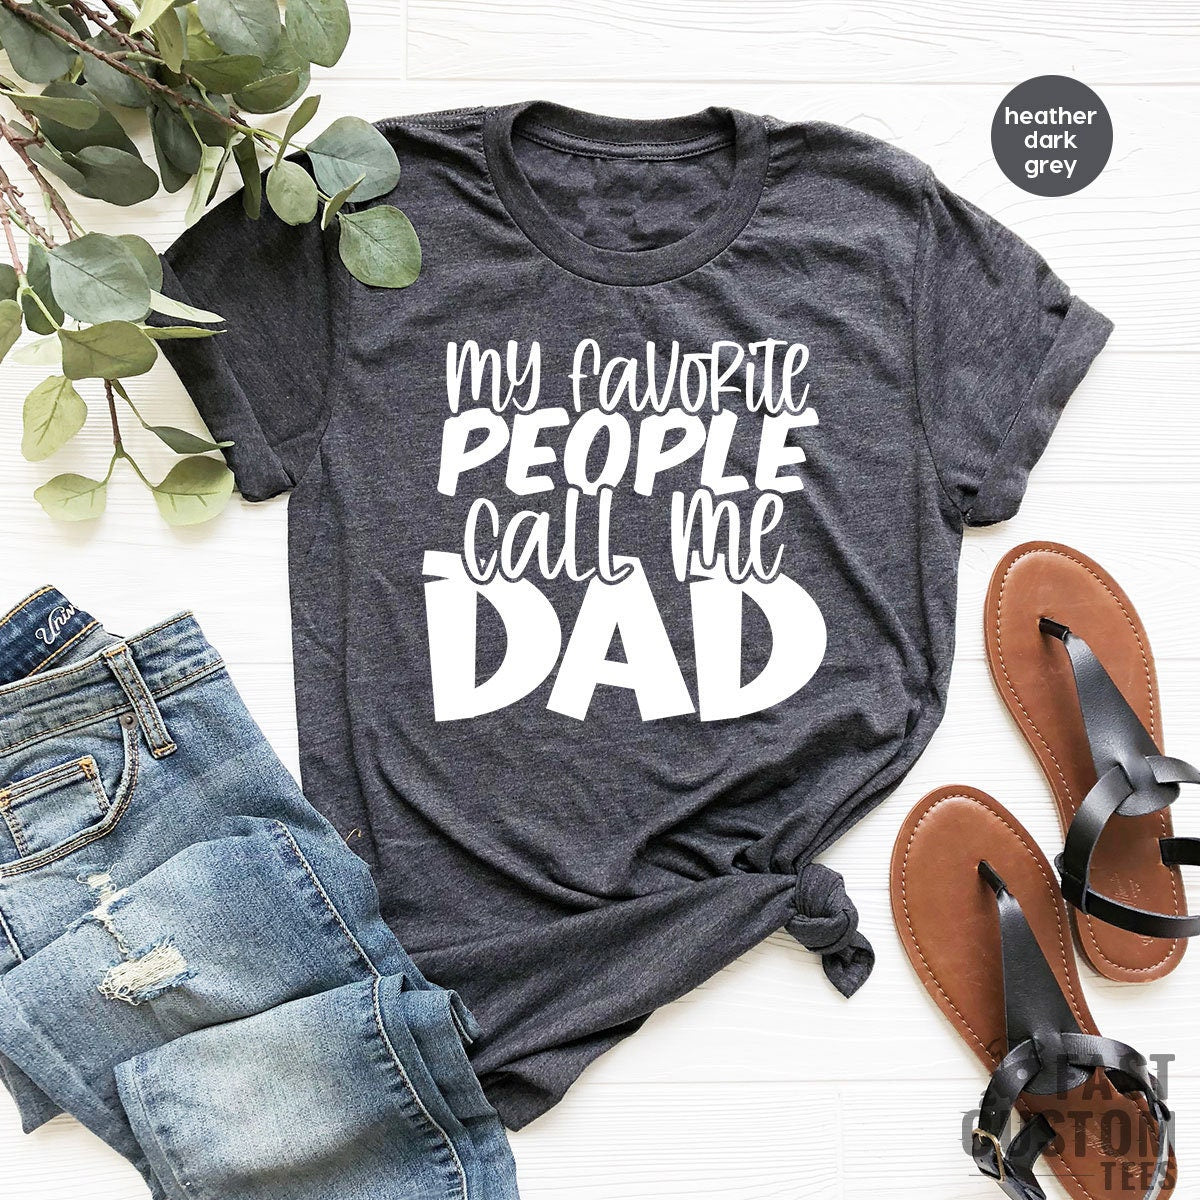 Favorite Dad Shirt, Dad Gifts, Gifts For Dad, Dad Birthday Gift